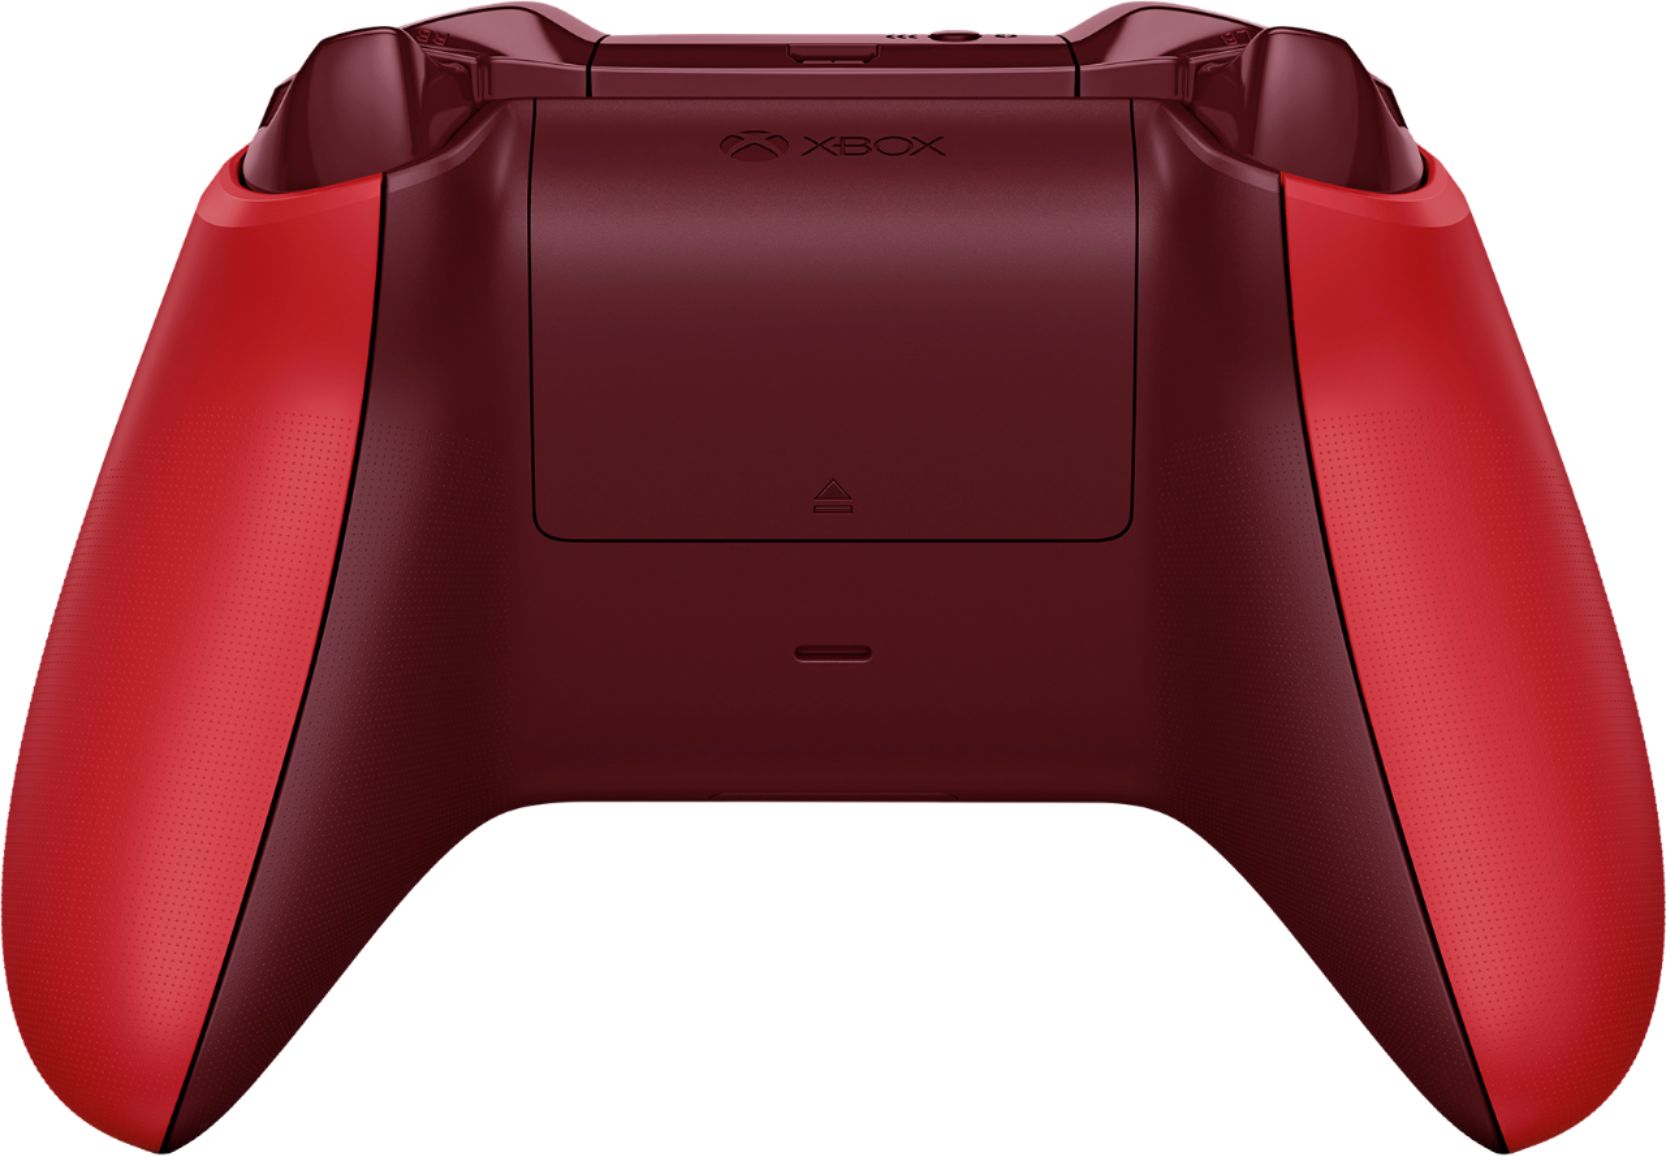 Back View: Microsoft - Geek Squad Certified Refurbished Wireless Controller for Xbox One and Windows 10 - Red